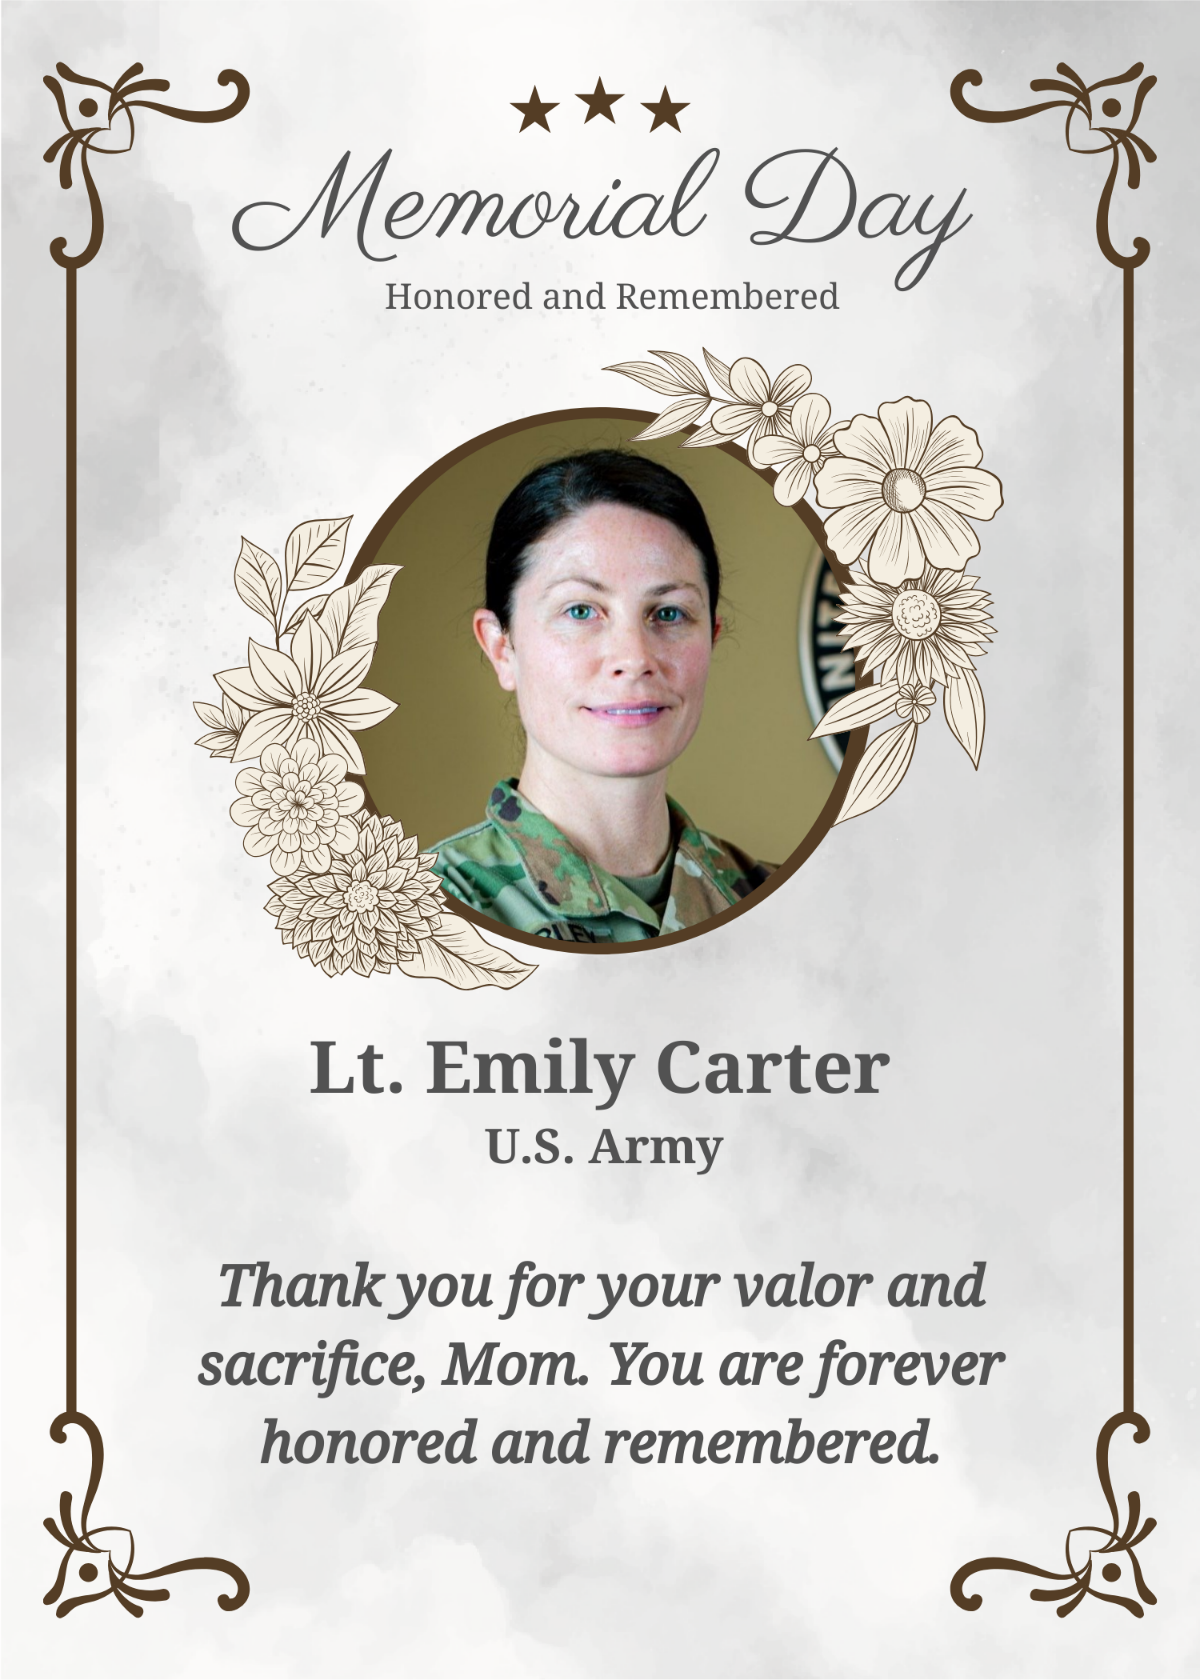 Memorial Day Message for Mom